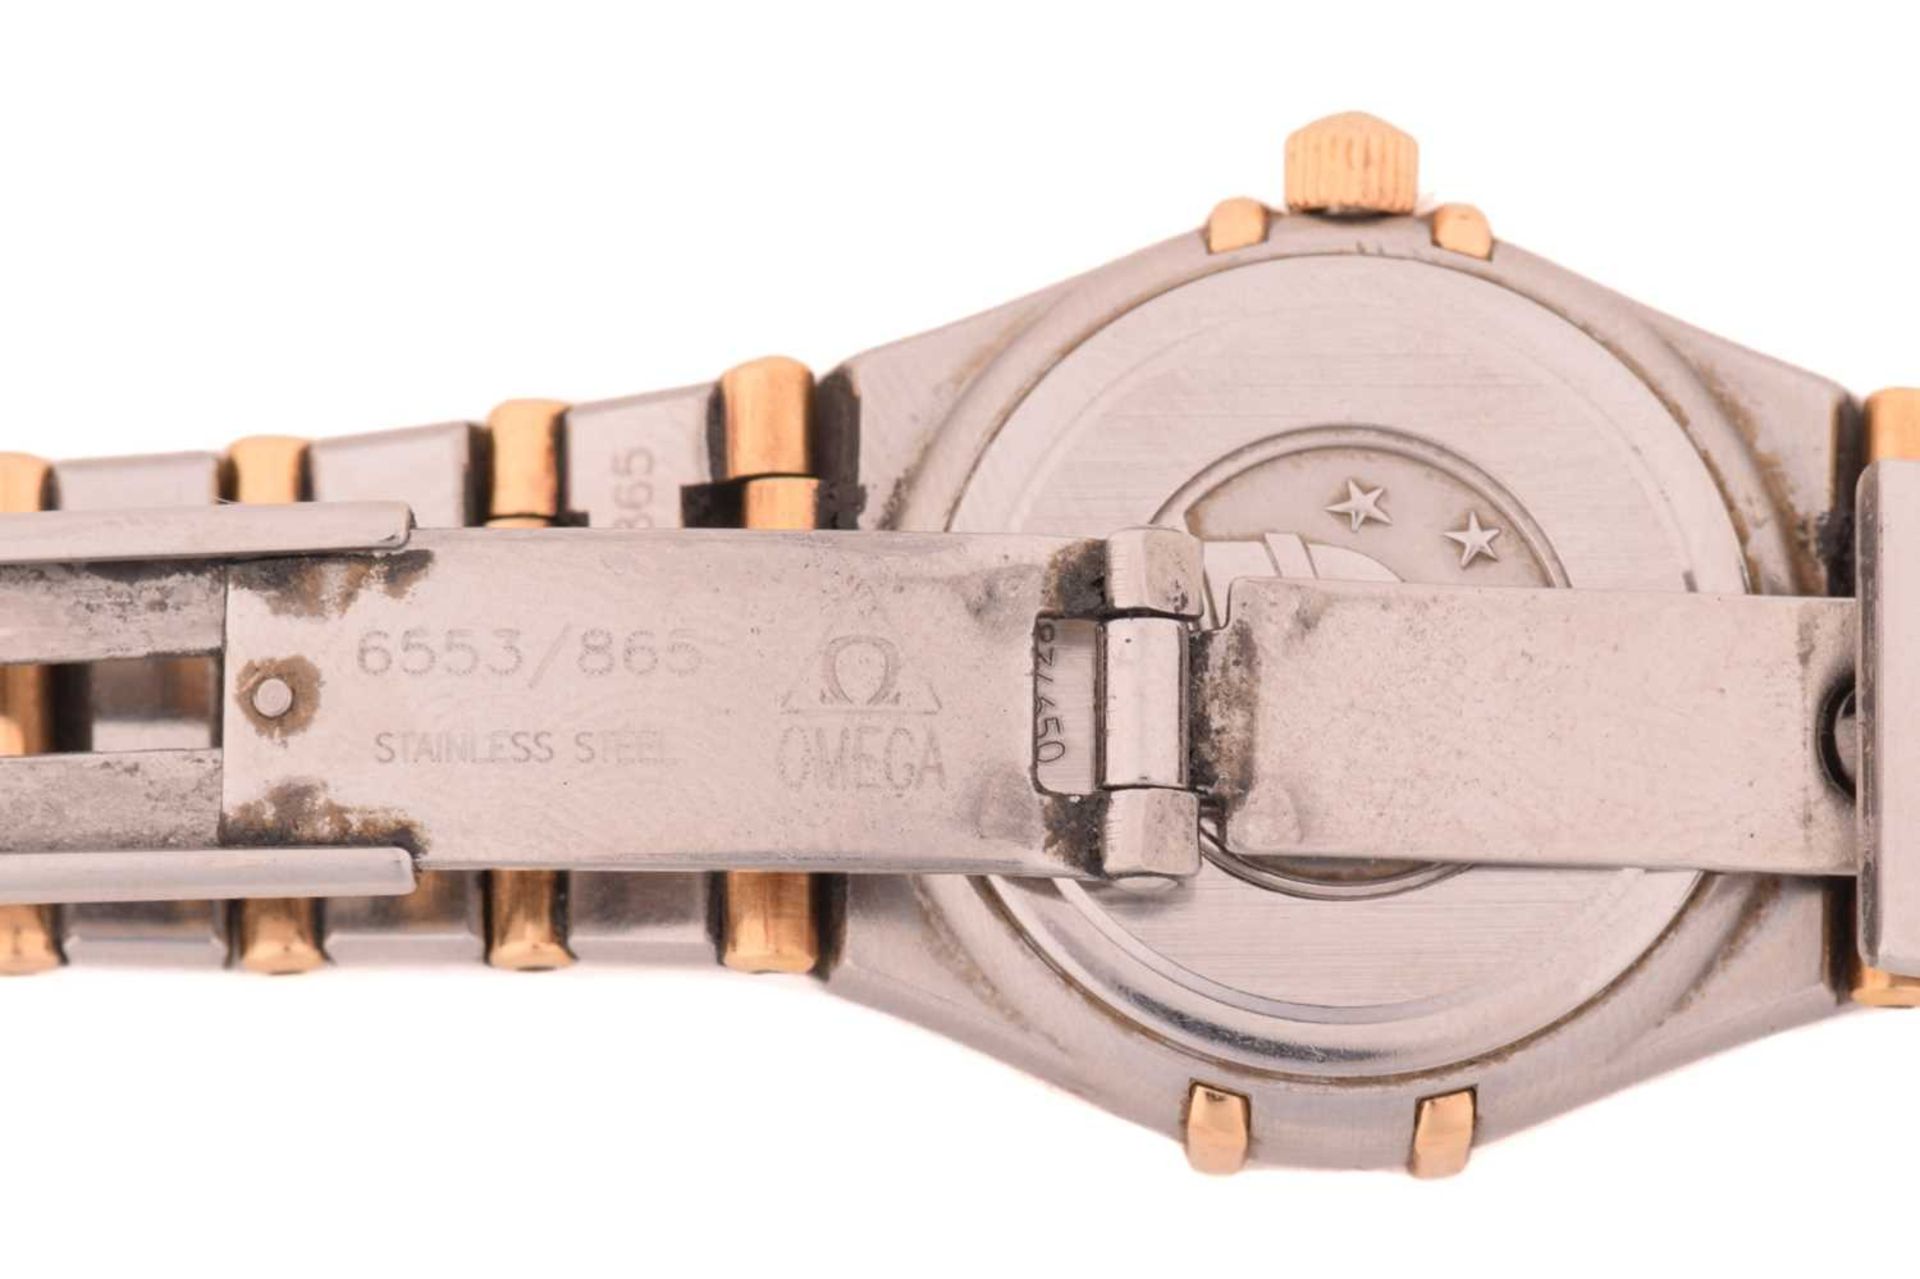 An Omega constellation lady's dress watch, featuring a Swiss-made quartz movement in a bi-metal case - Image 8 of 9